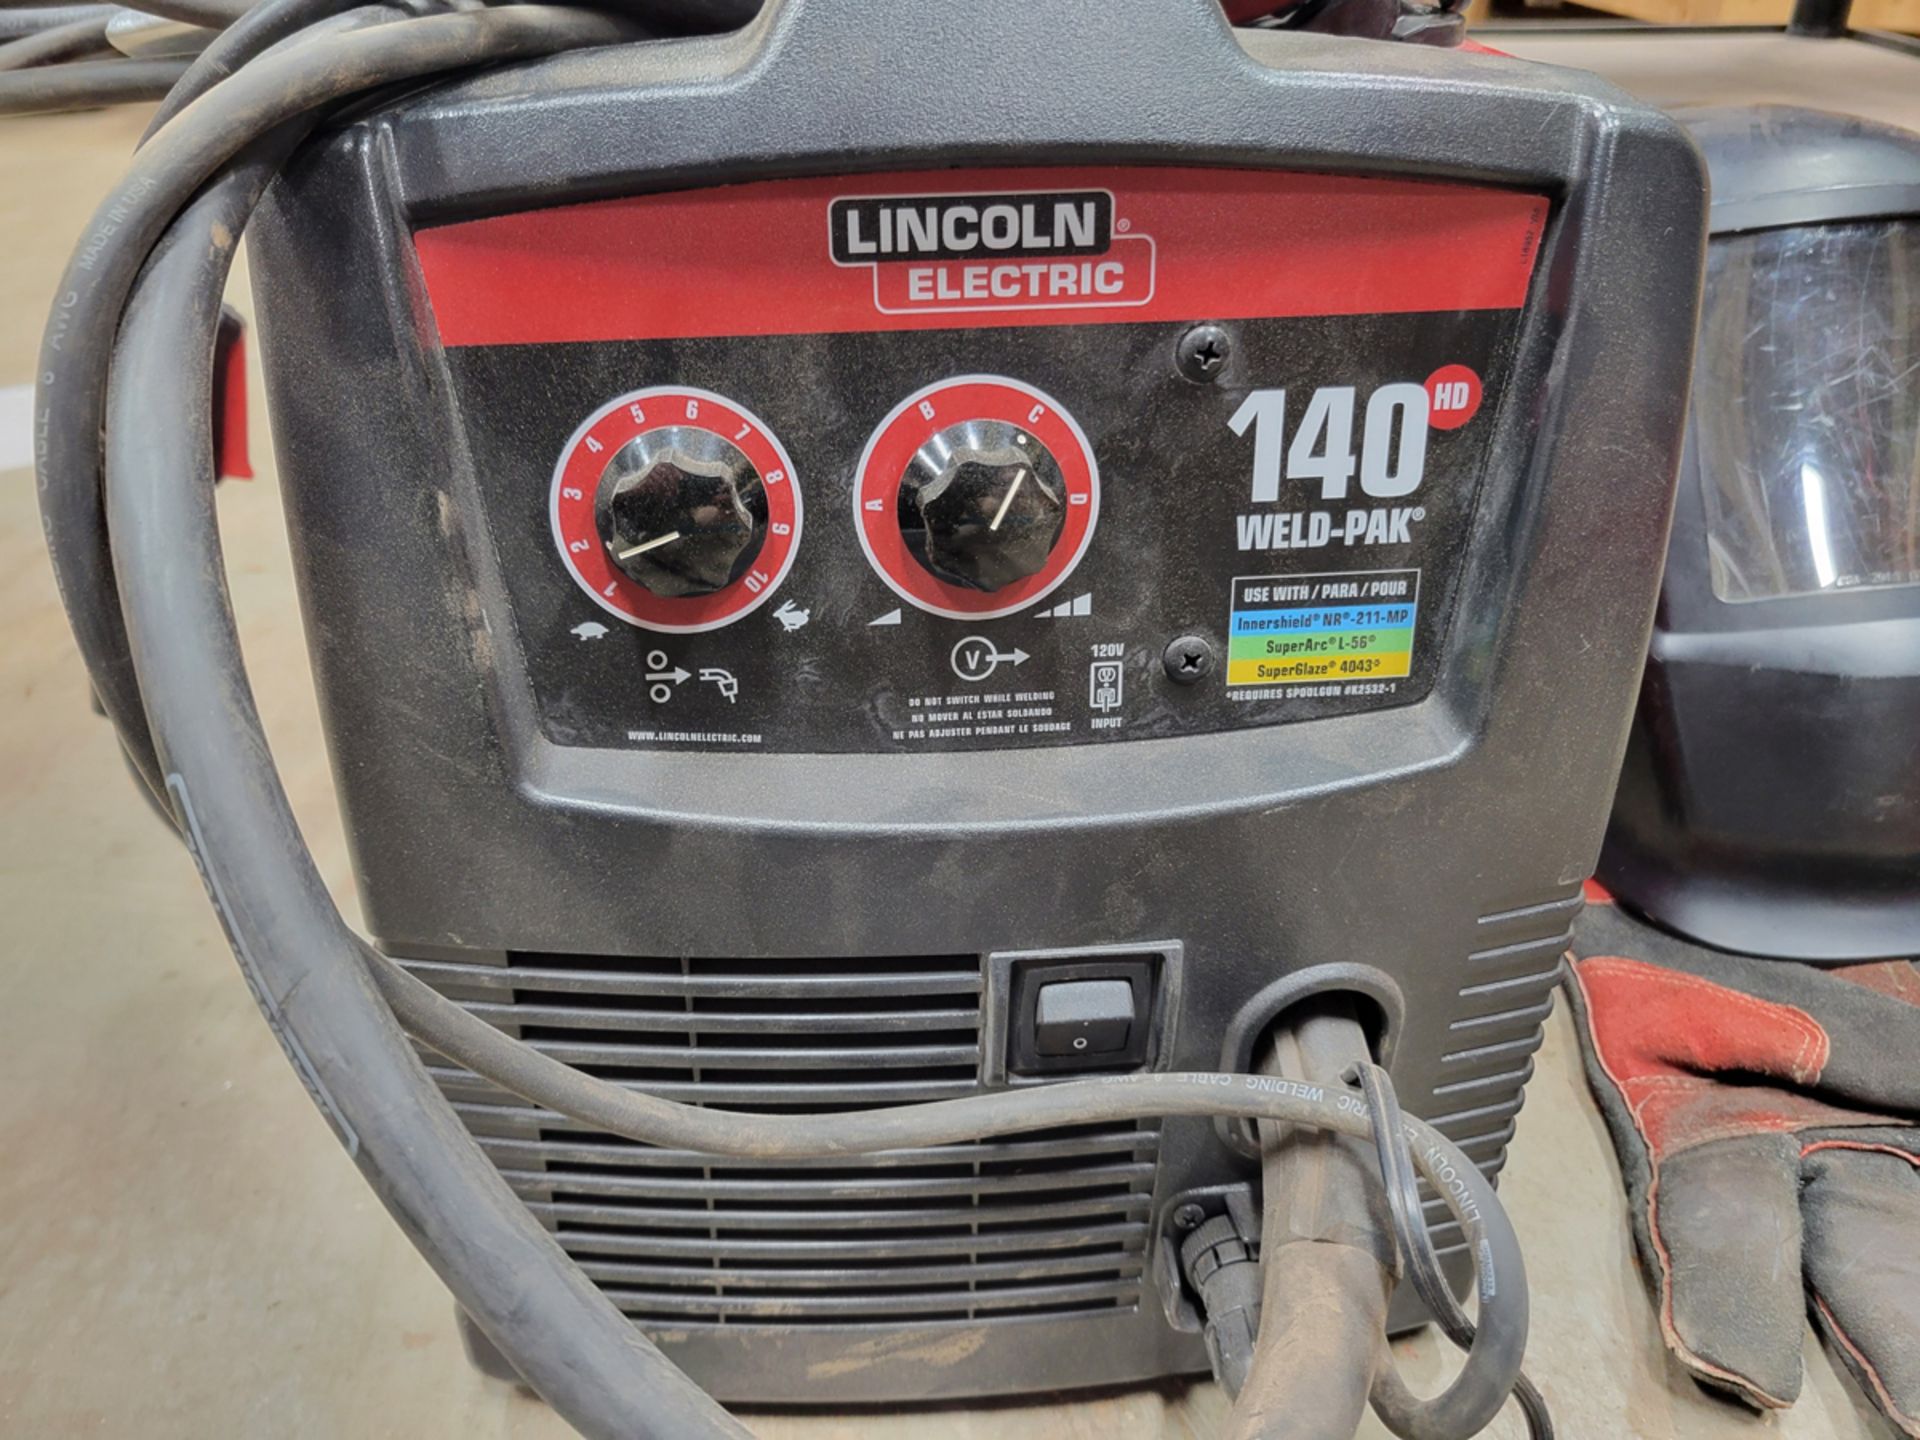 Lincoln Electric Weld Pak 140 HD Mig/ Wire Feed Welder w/ Mask and Gloves - Image 3 of 4